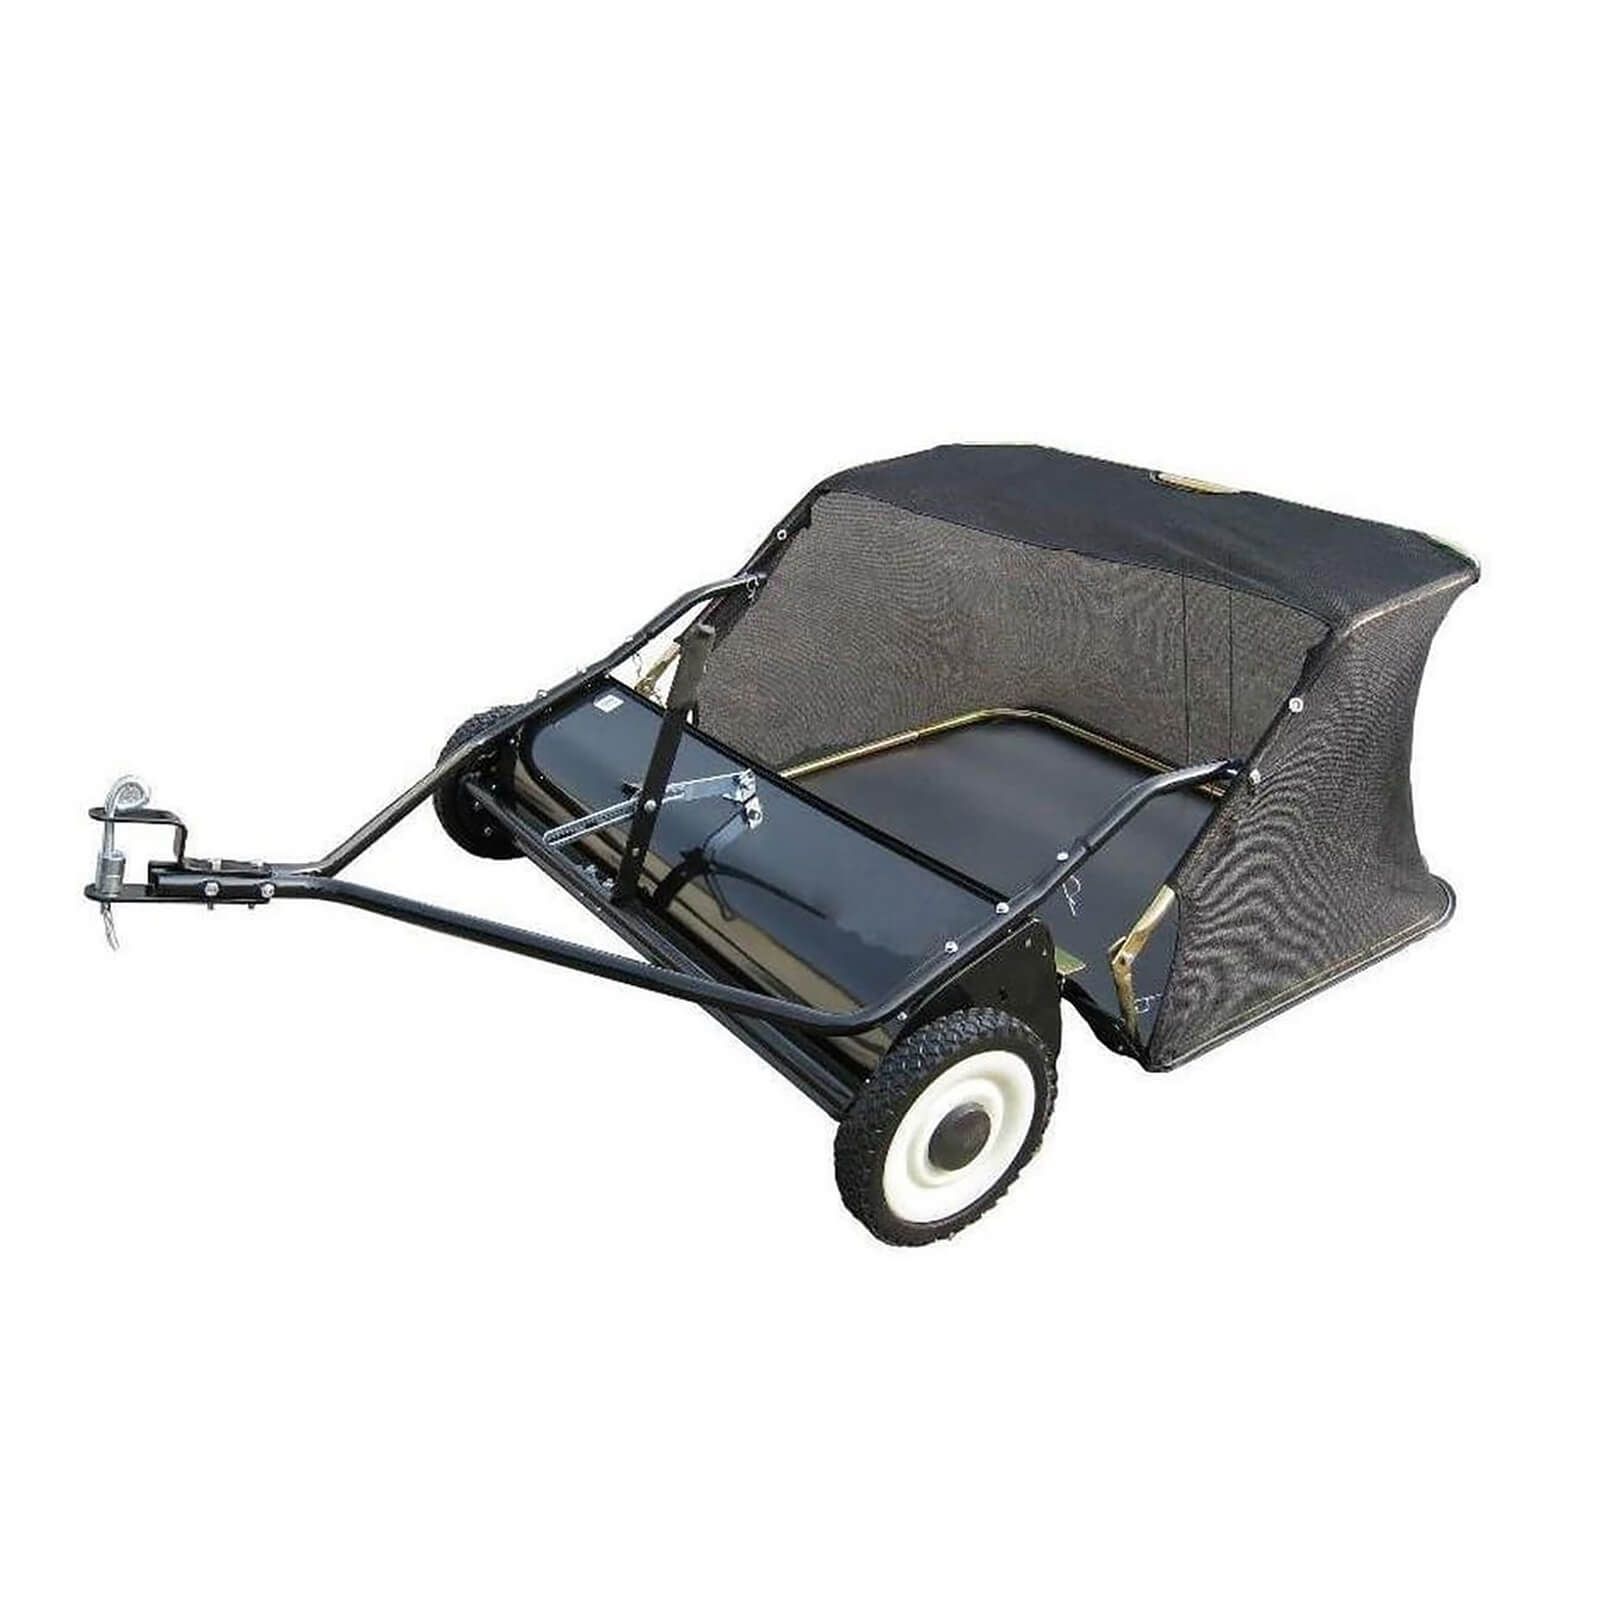 The Handy Towed Lawn Sweeper